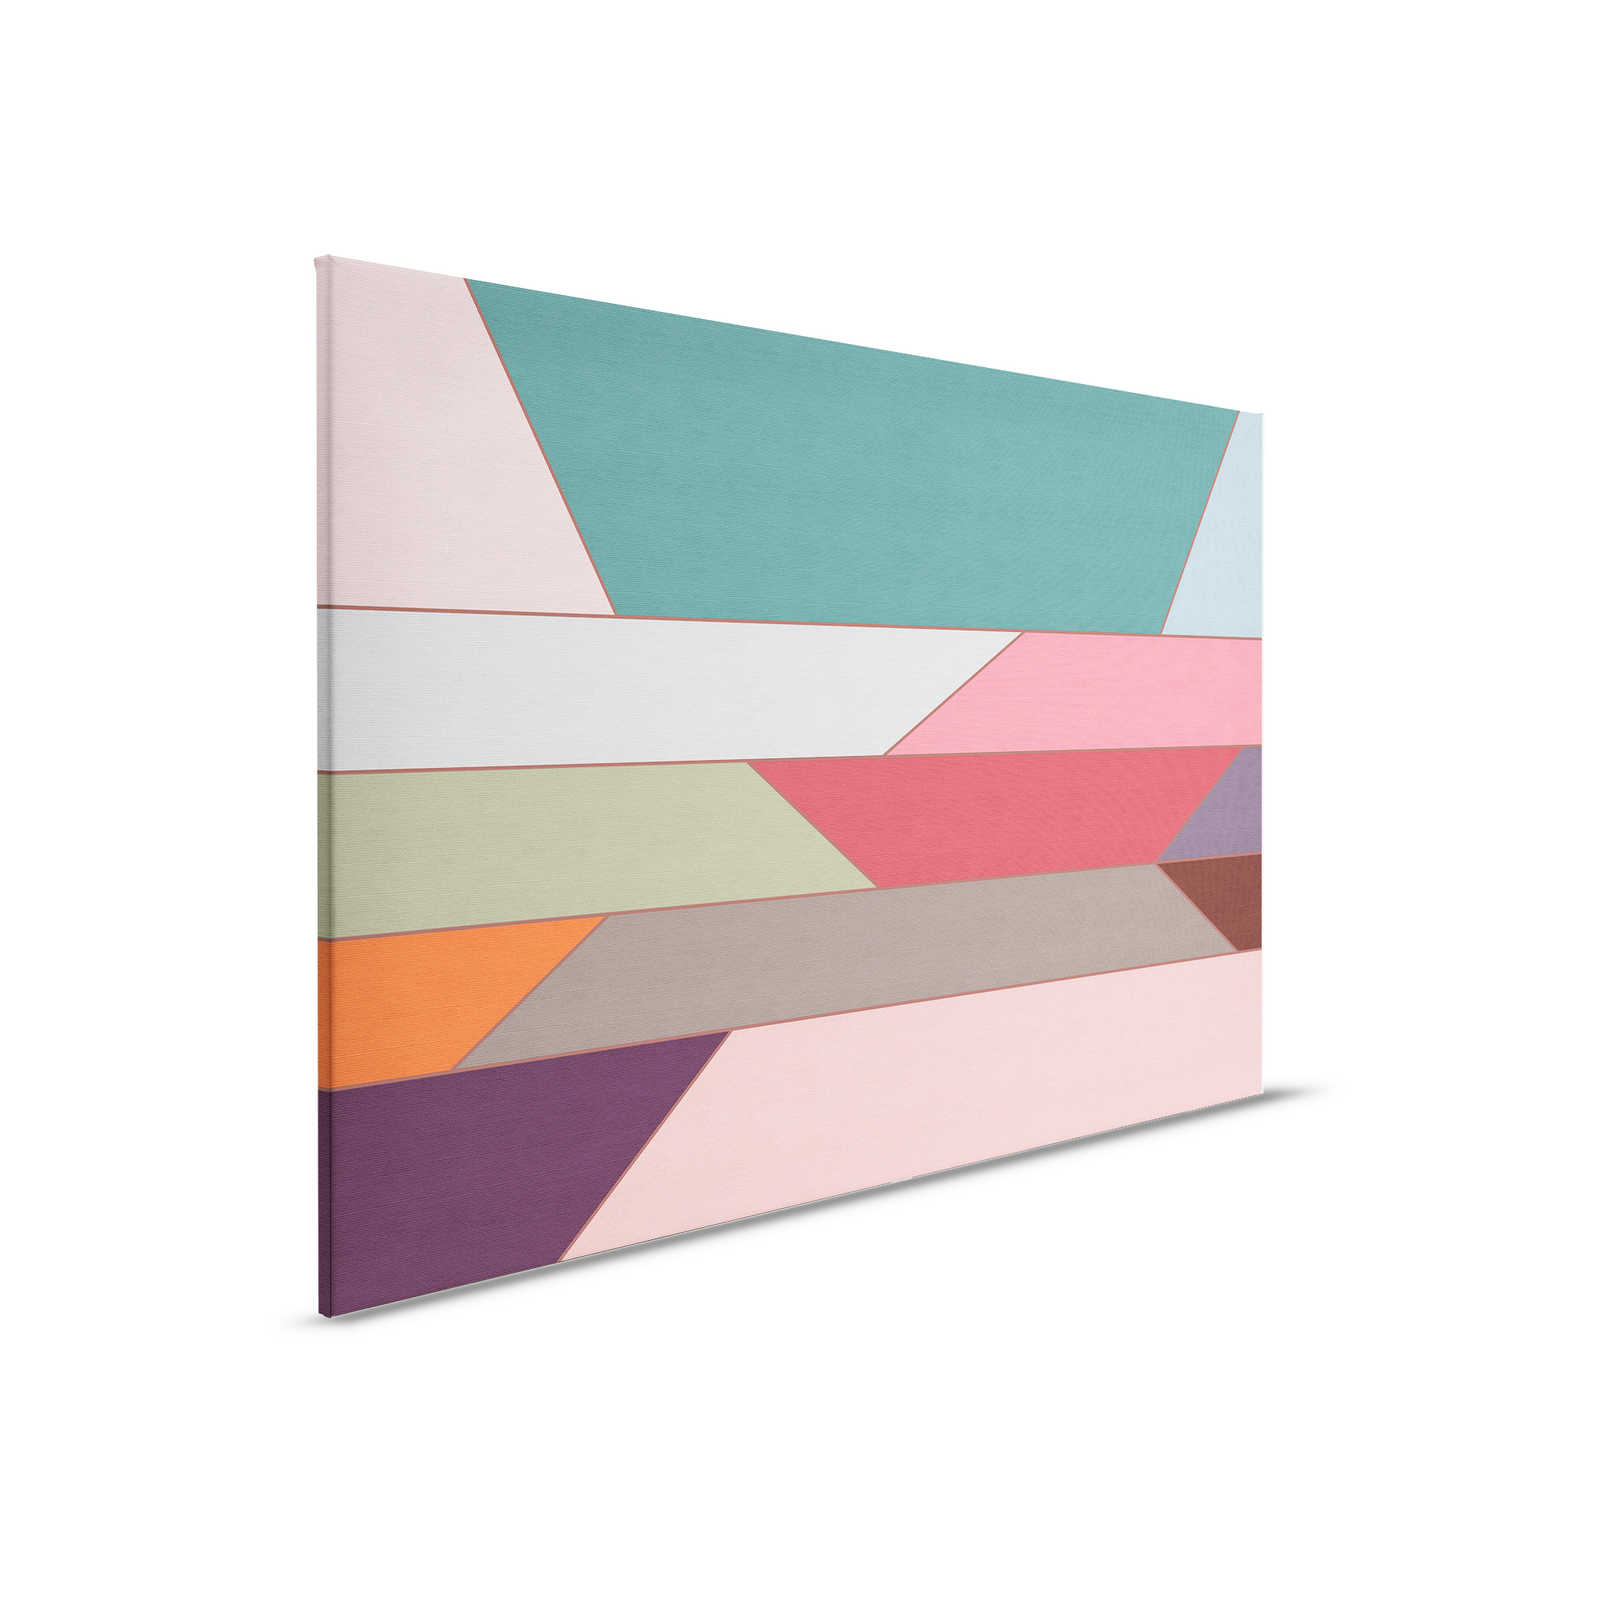         Geometry 2 - Canvas painting with colourful horizontal stripe pattern in ribbed structure - 0.90 m x 0.60 m
    